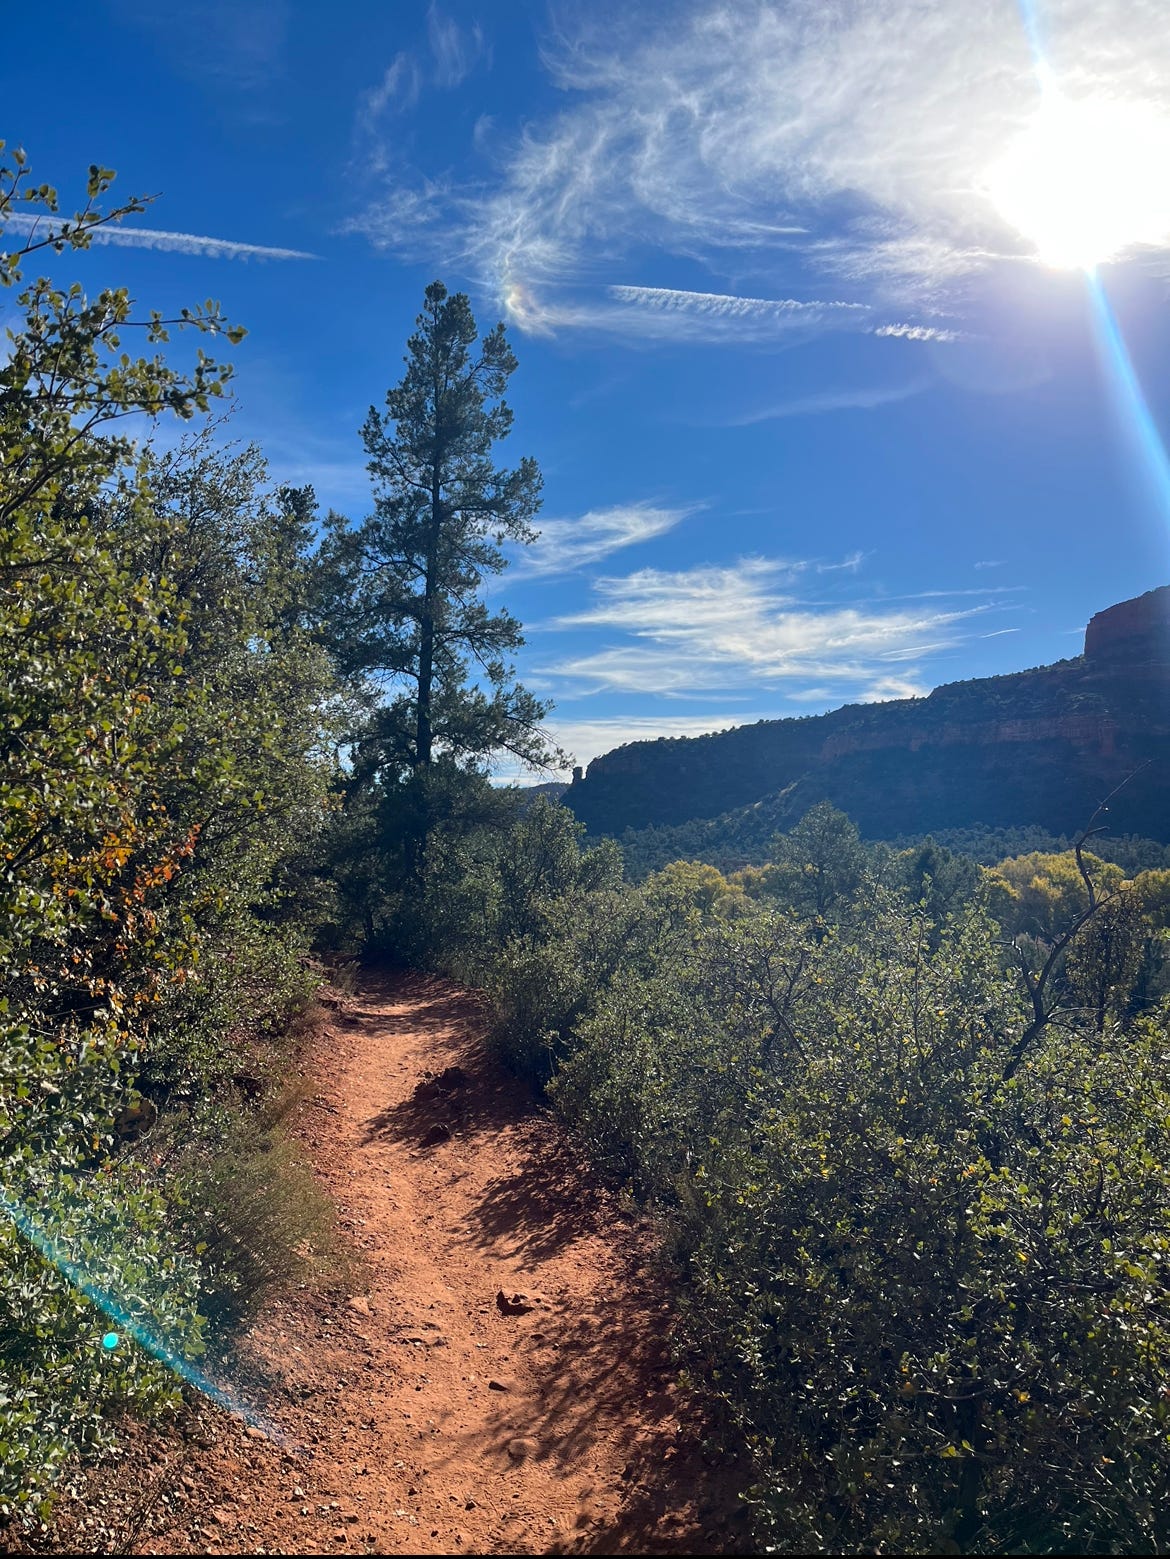 boynton canyon trail lined with trees on the left and rock walls on the right